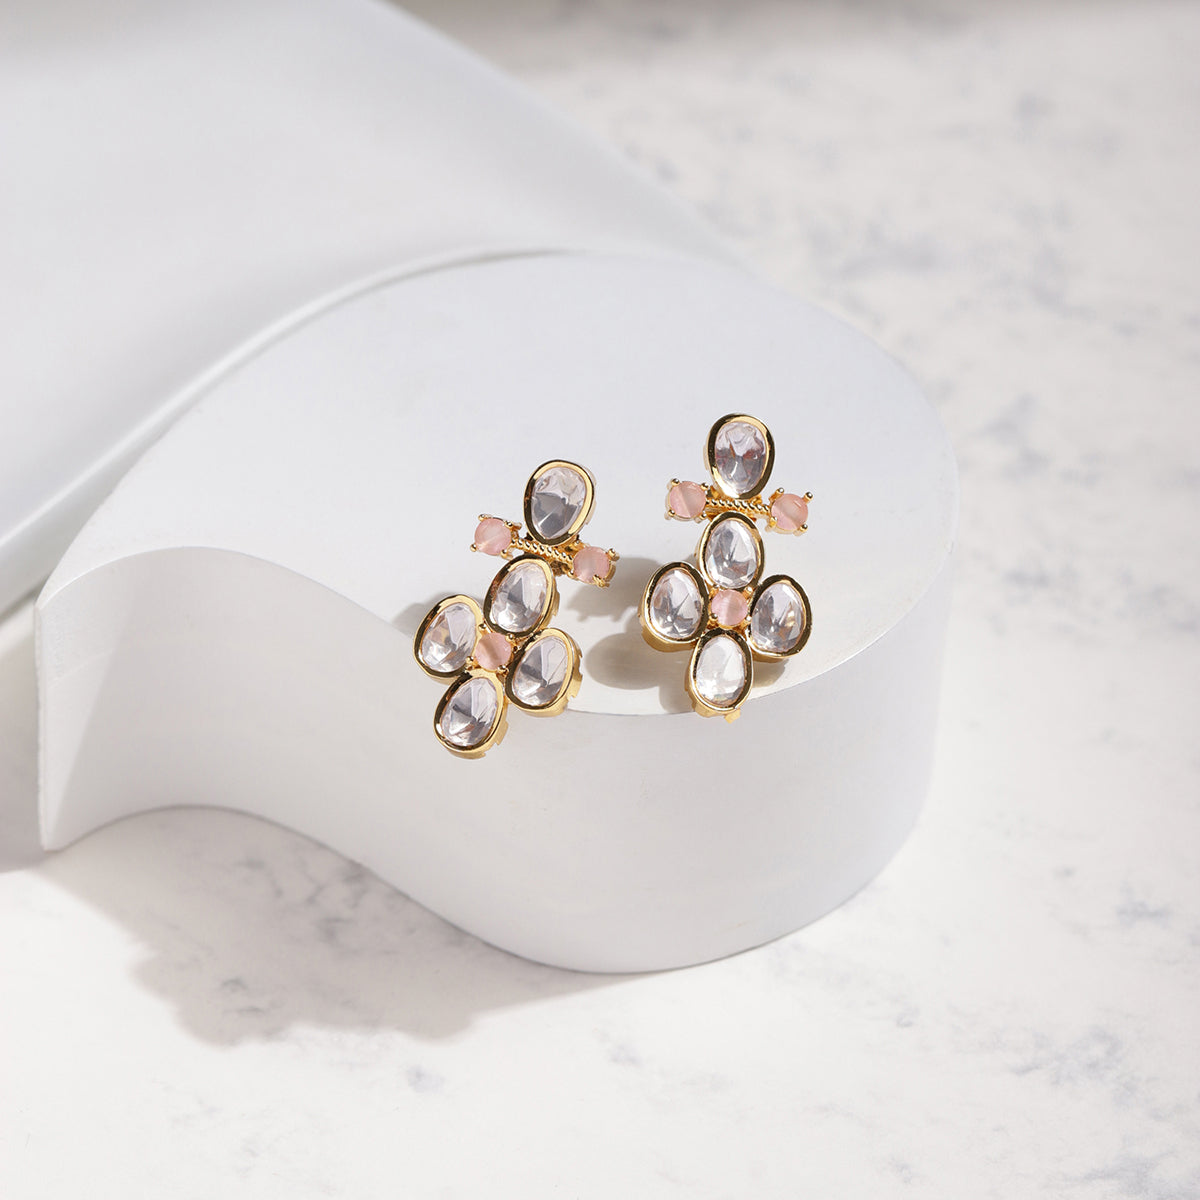 Gold-Toned & Pink Contemporary Studs Earrings